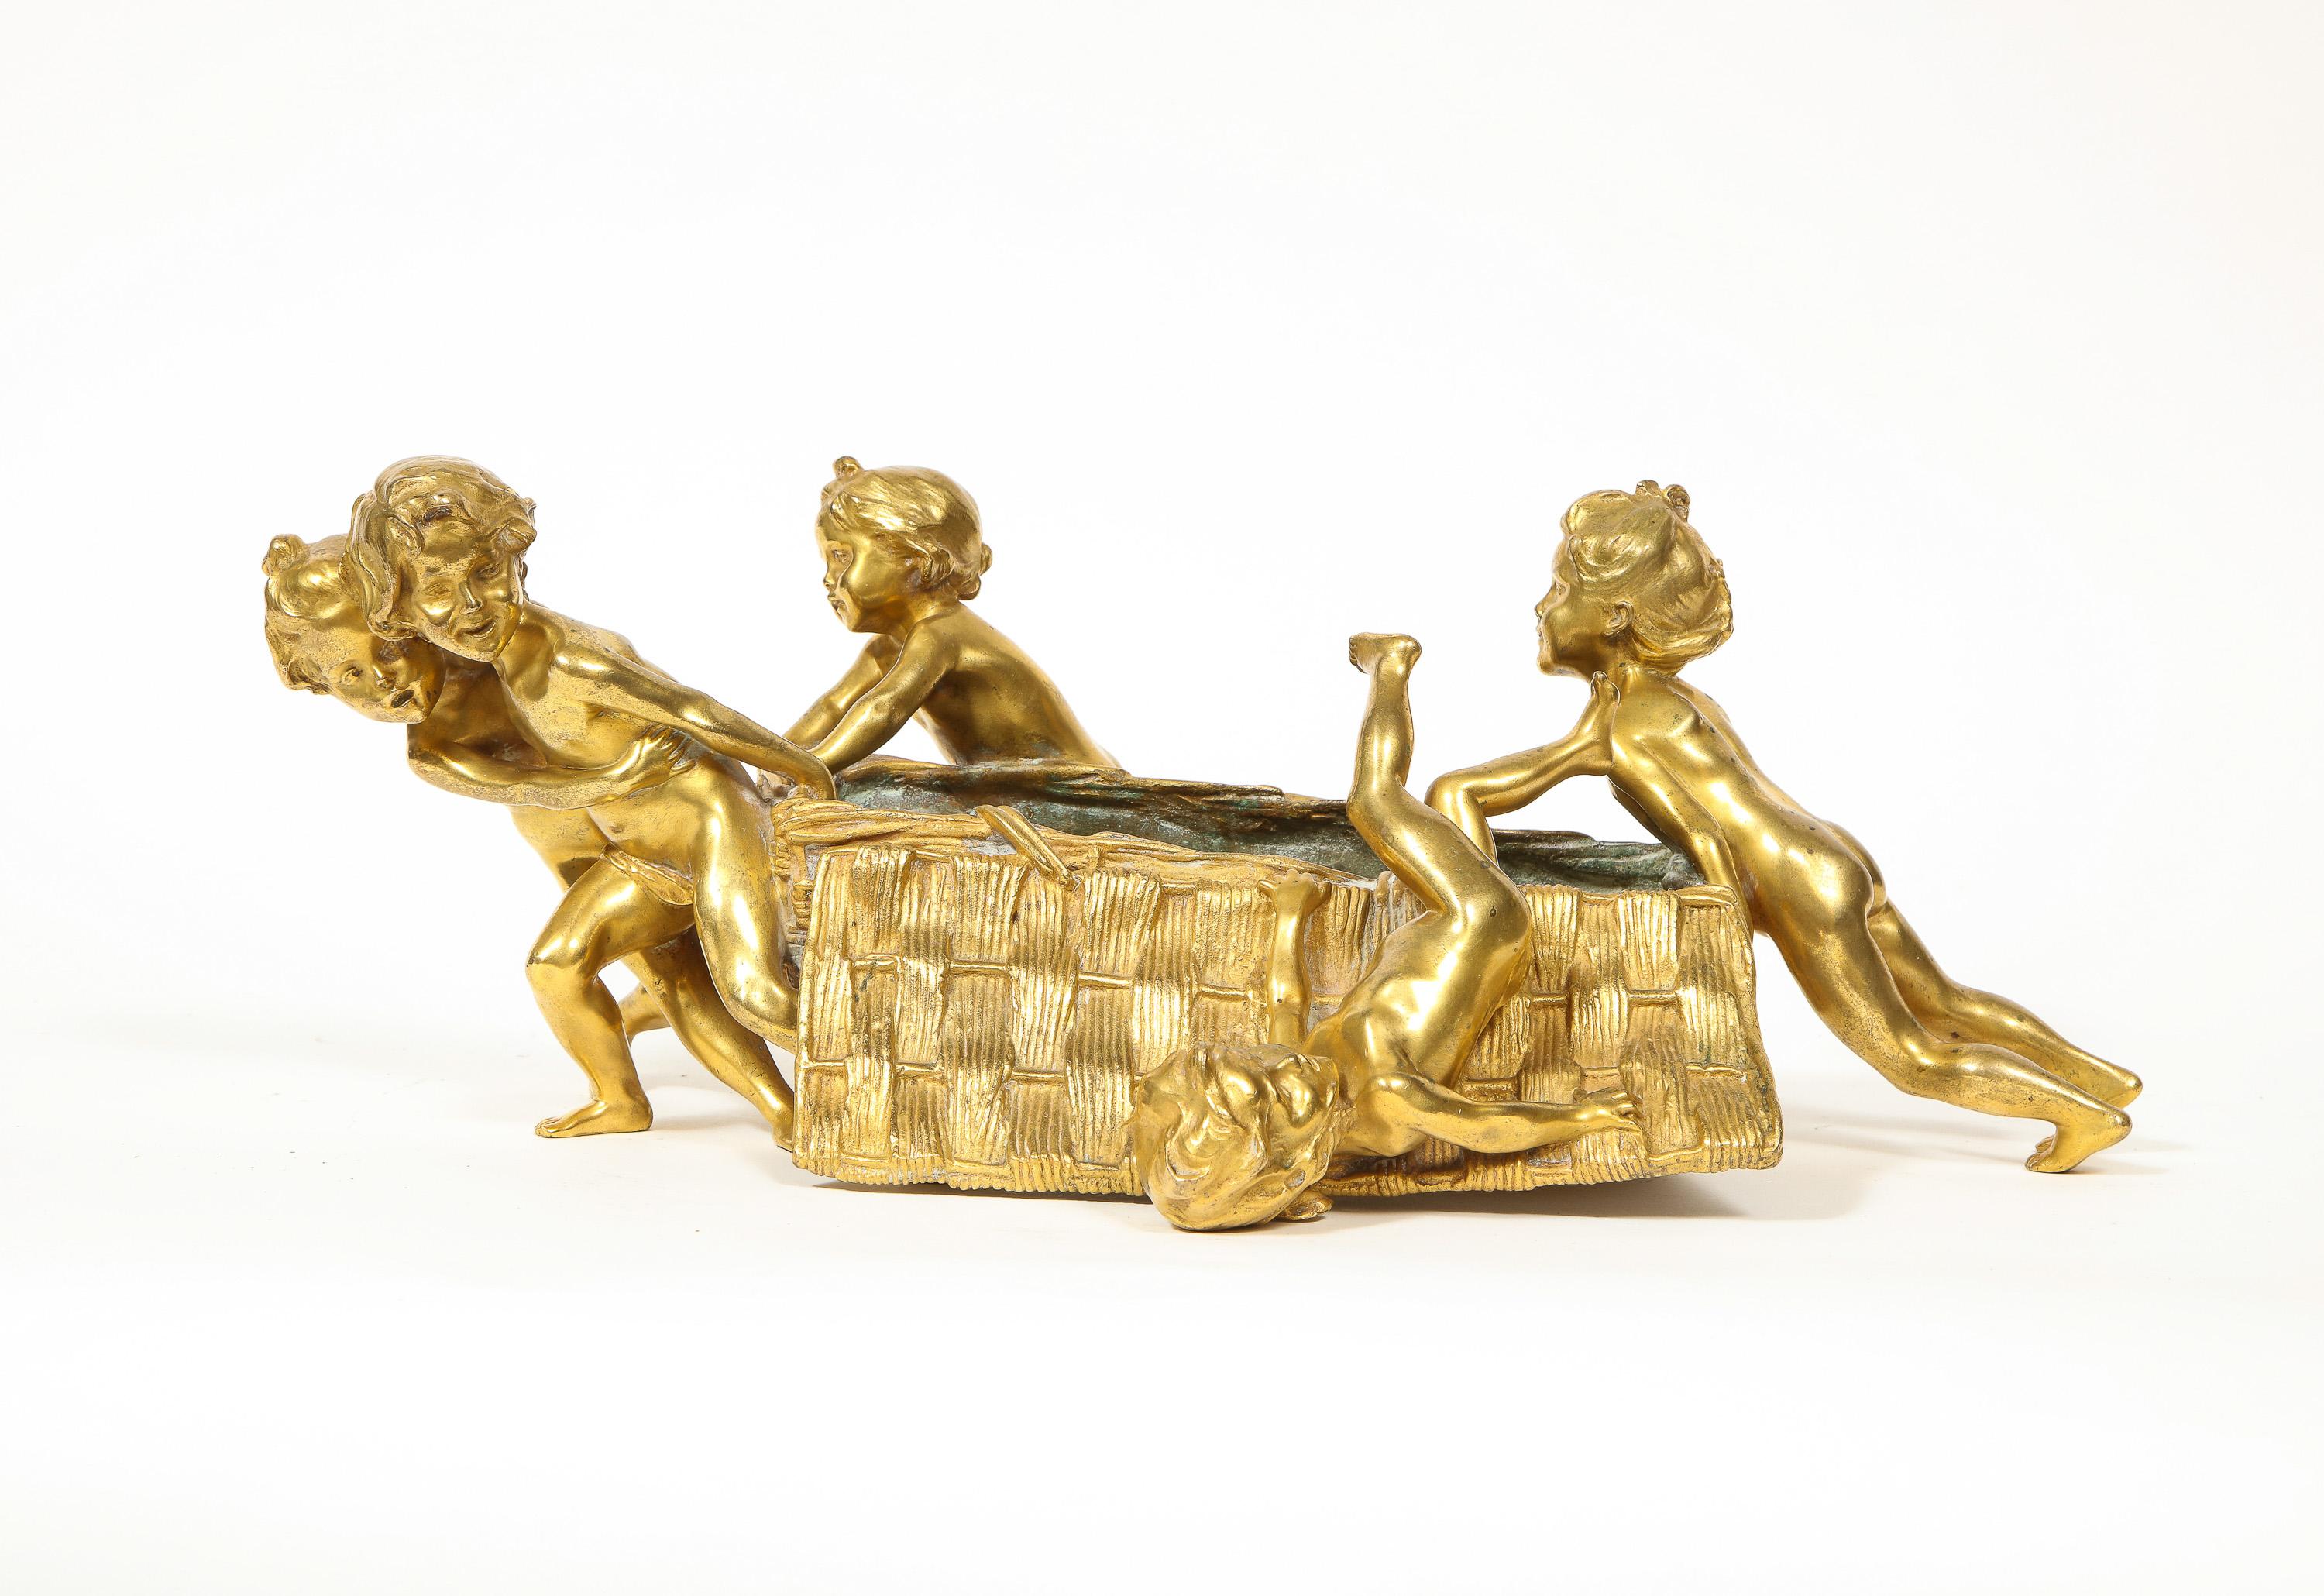 Francois-Raoul Larche (French, 1860-1912) A French gilt bronze ormolu figural table centerpiece or basket, circa 1900.

Depicting baby children pushing and pulling the basket.

Inscribed Raoul Larche Siot-Paris foundry marked edition number